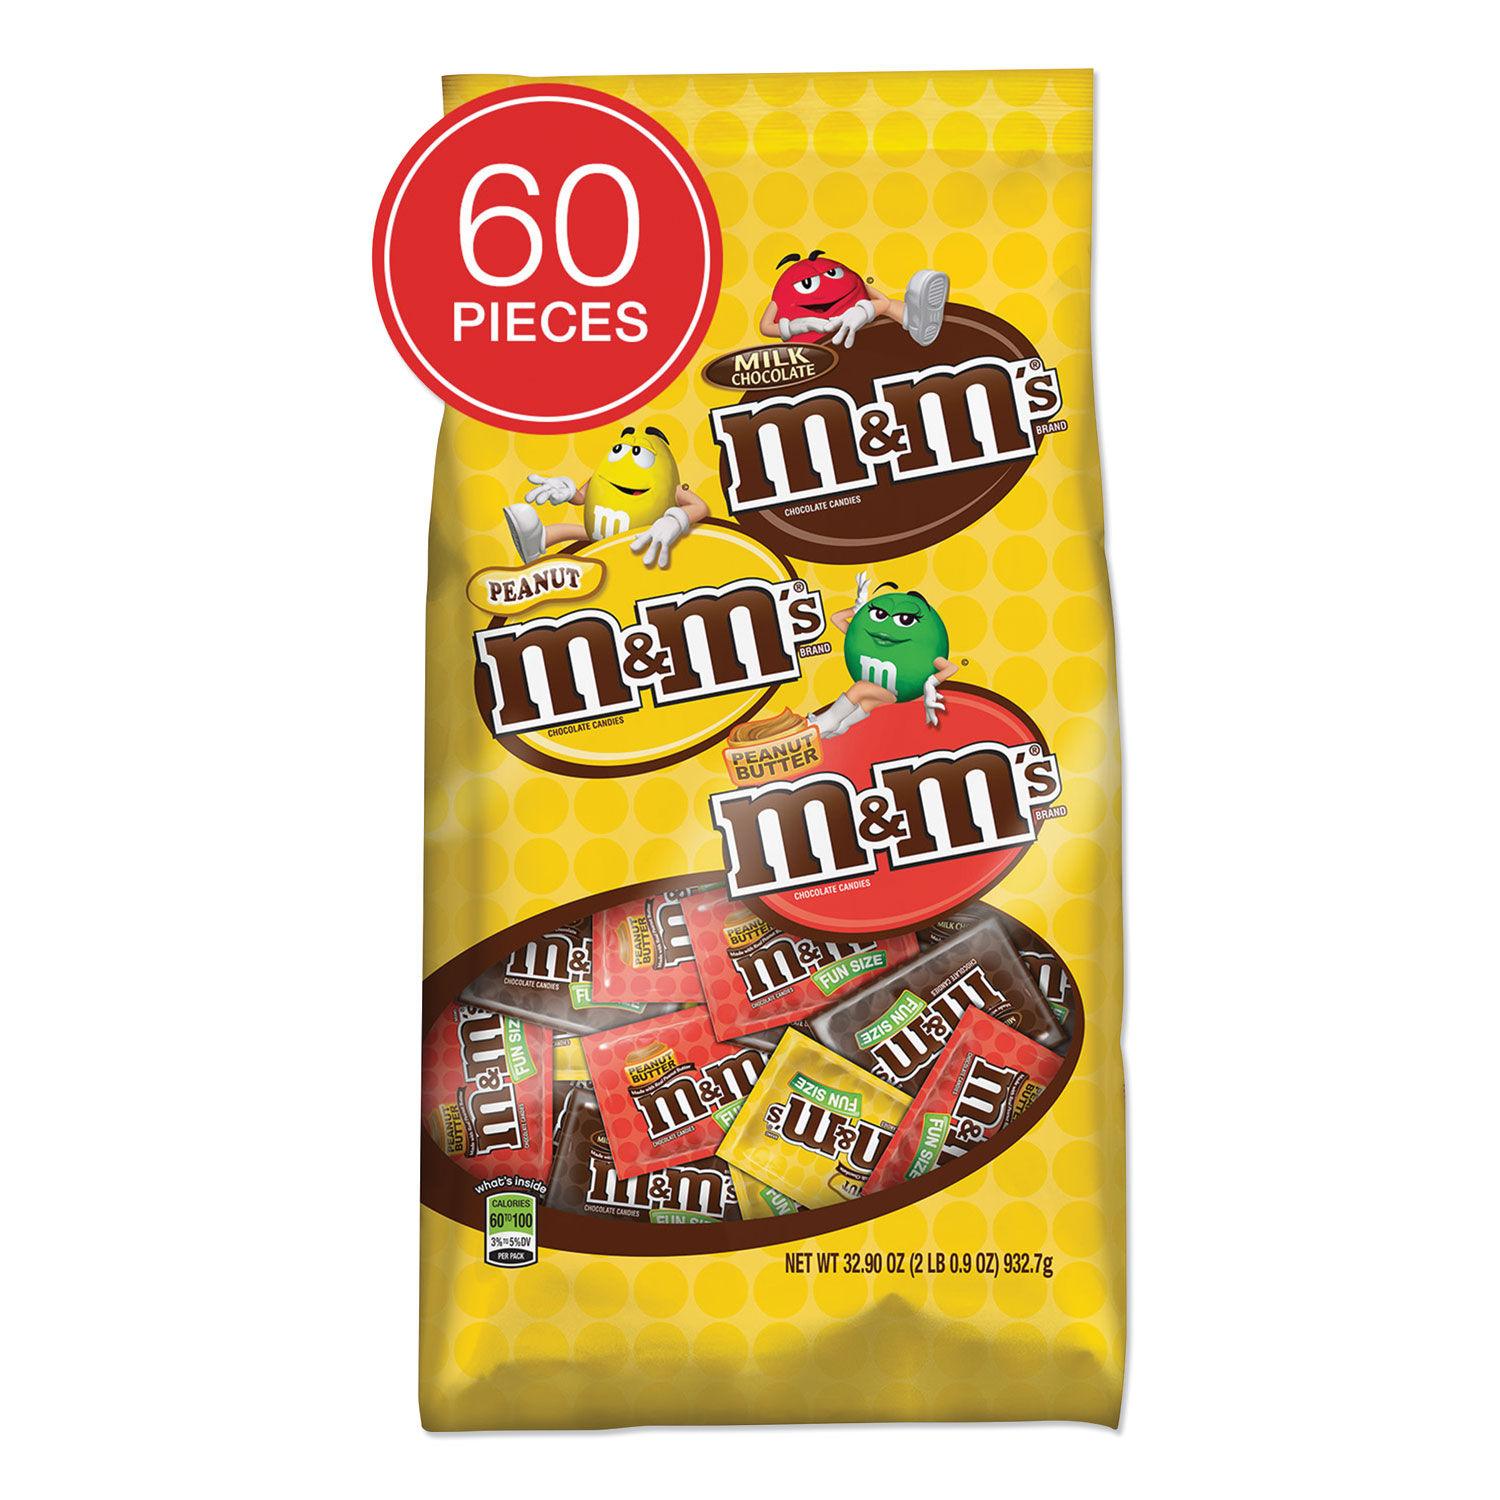 M&M's Chocolate Fun Size Bags Multipack 11 x 20g - We Get Any Stock